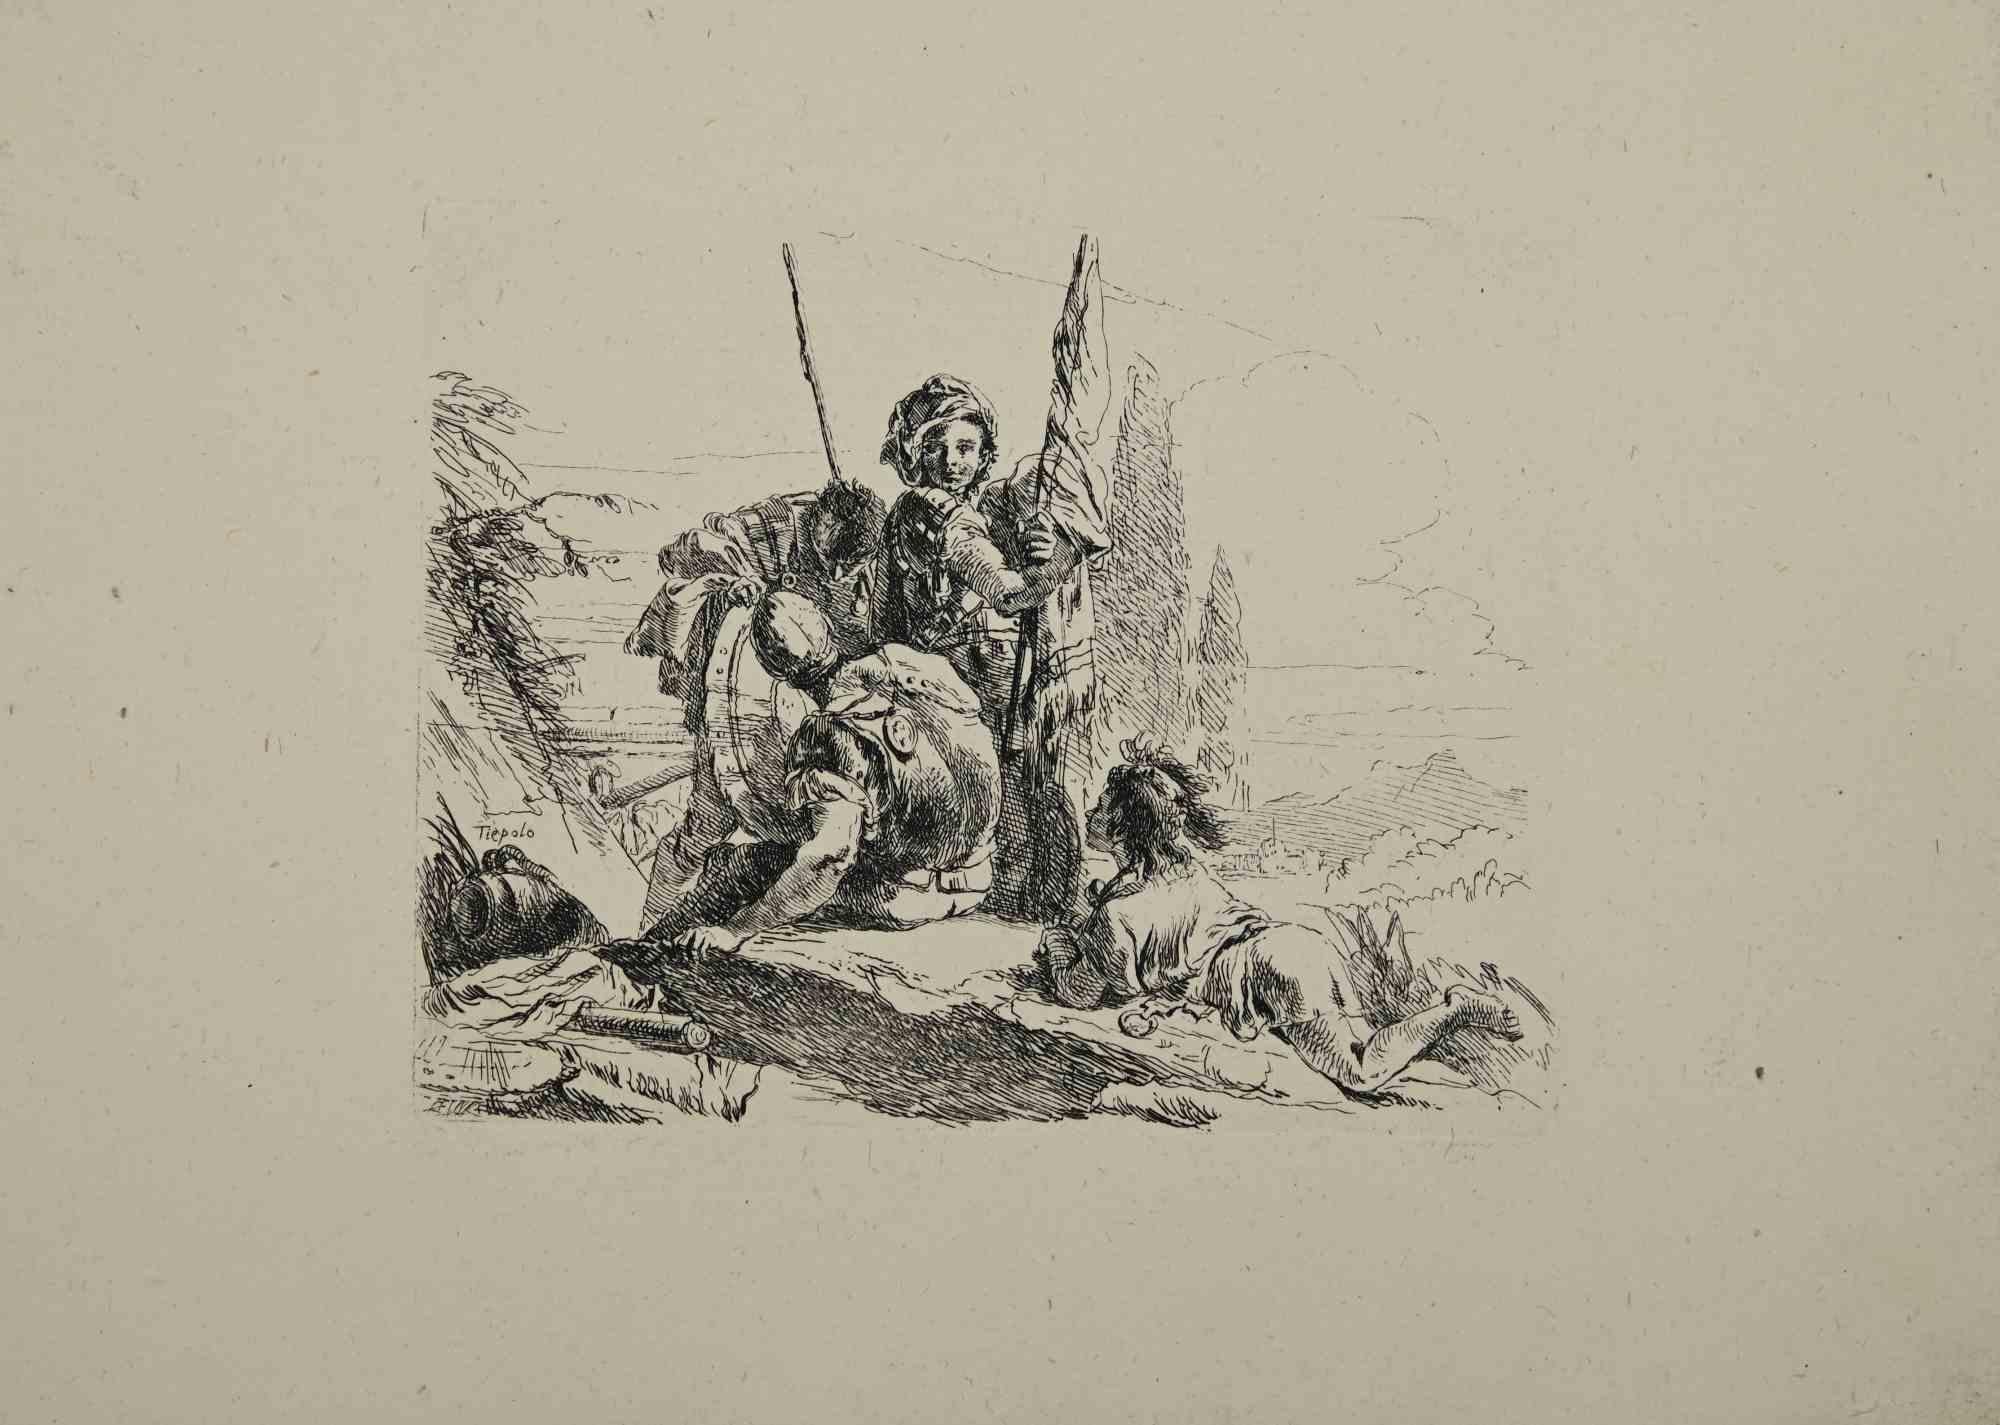 Giovanni Battista Tiepolo Figurative Print - Two Soldiers - Etching by G.B. Tiepolo - 1785